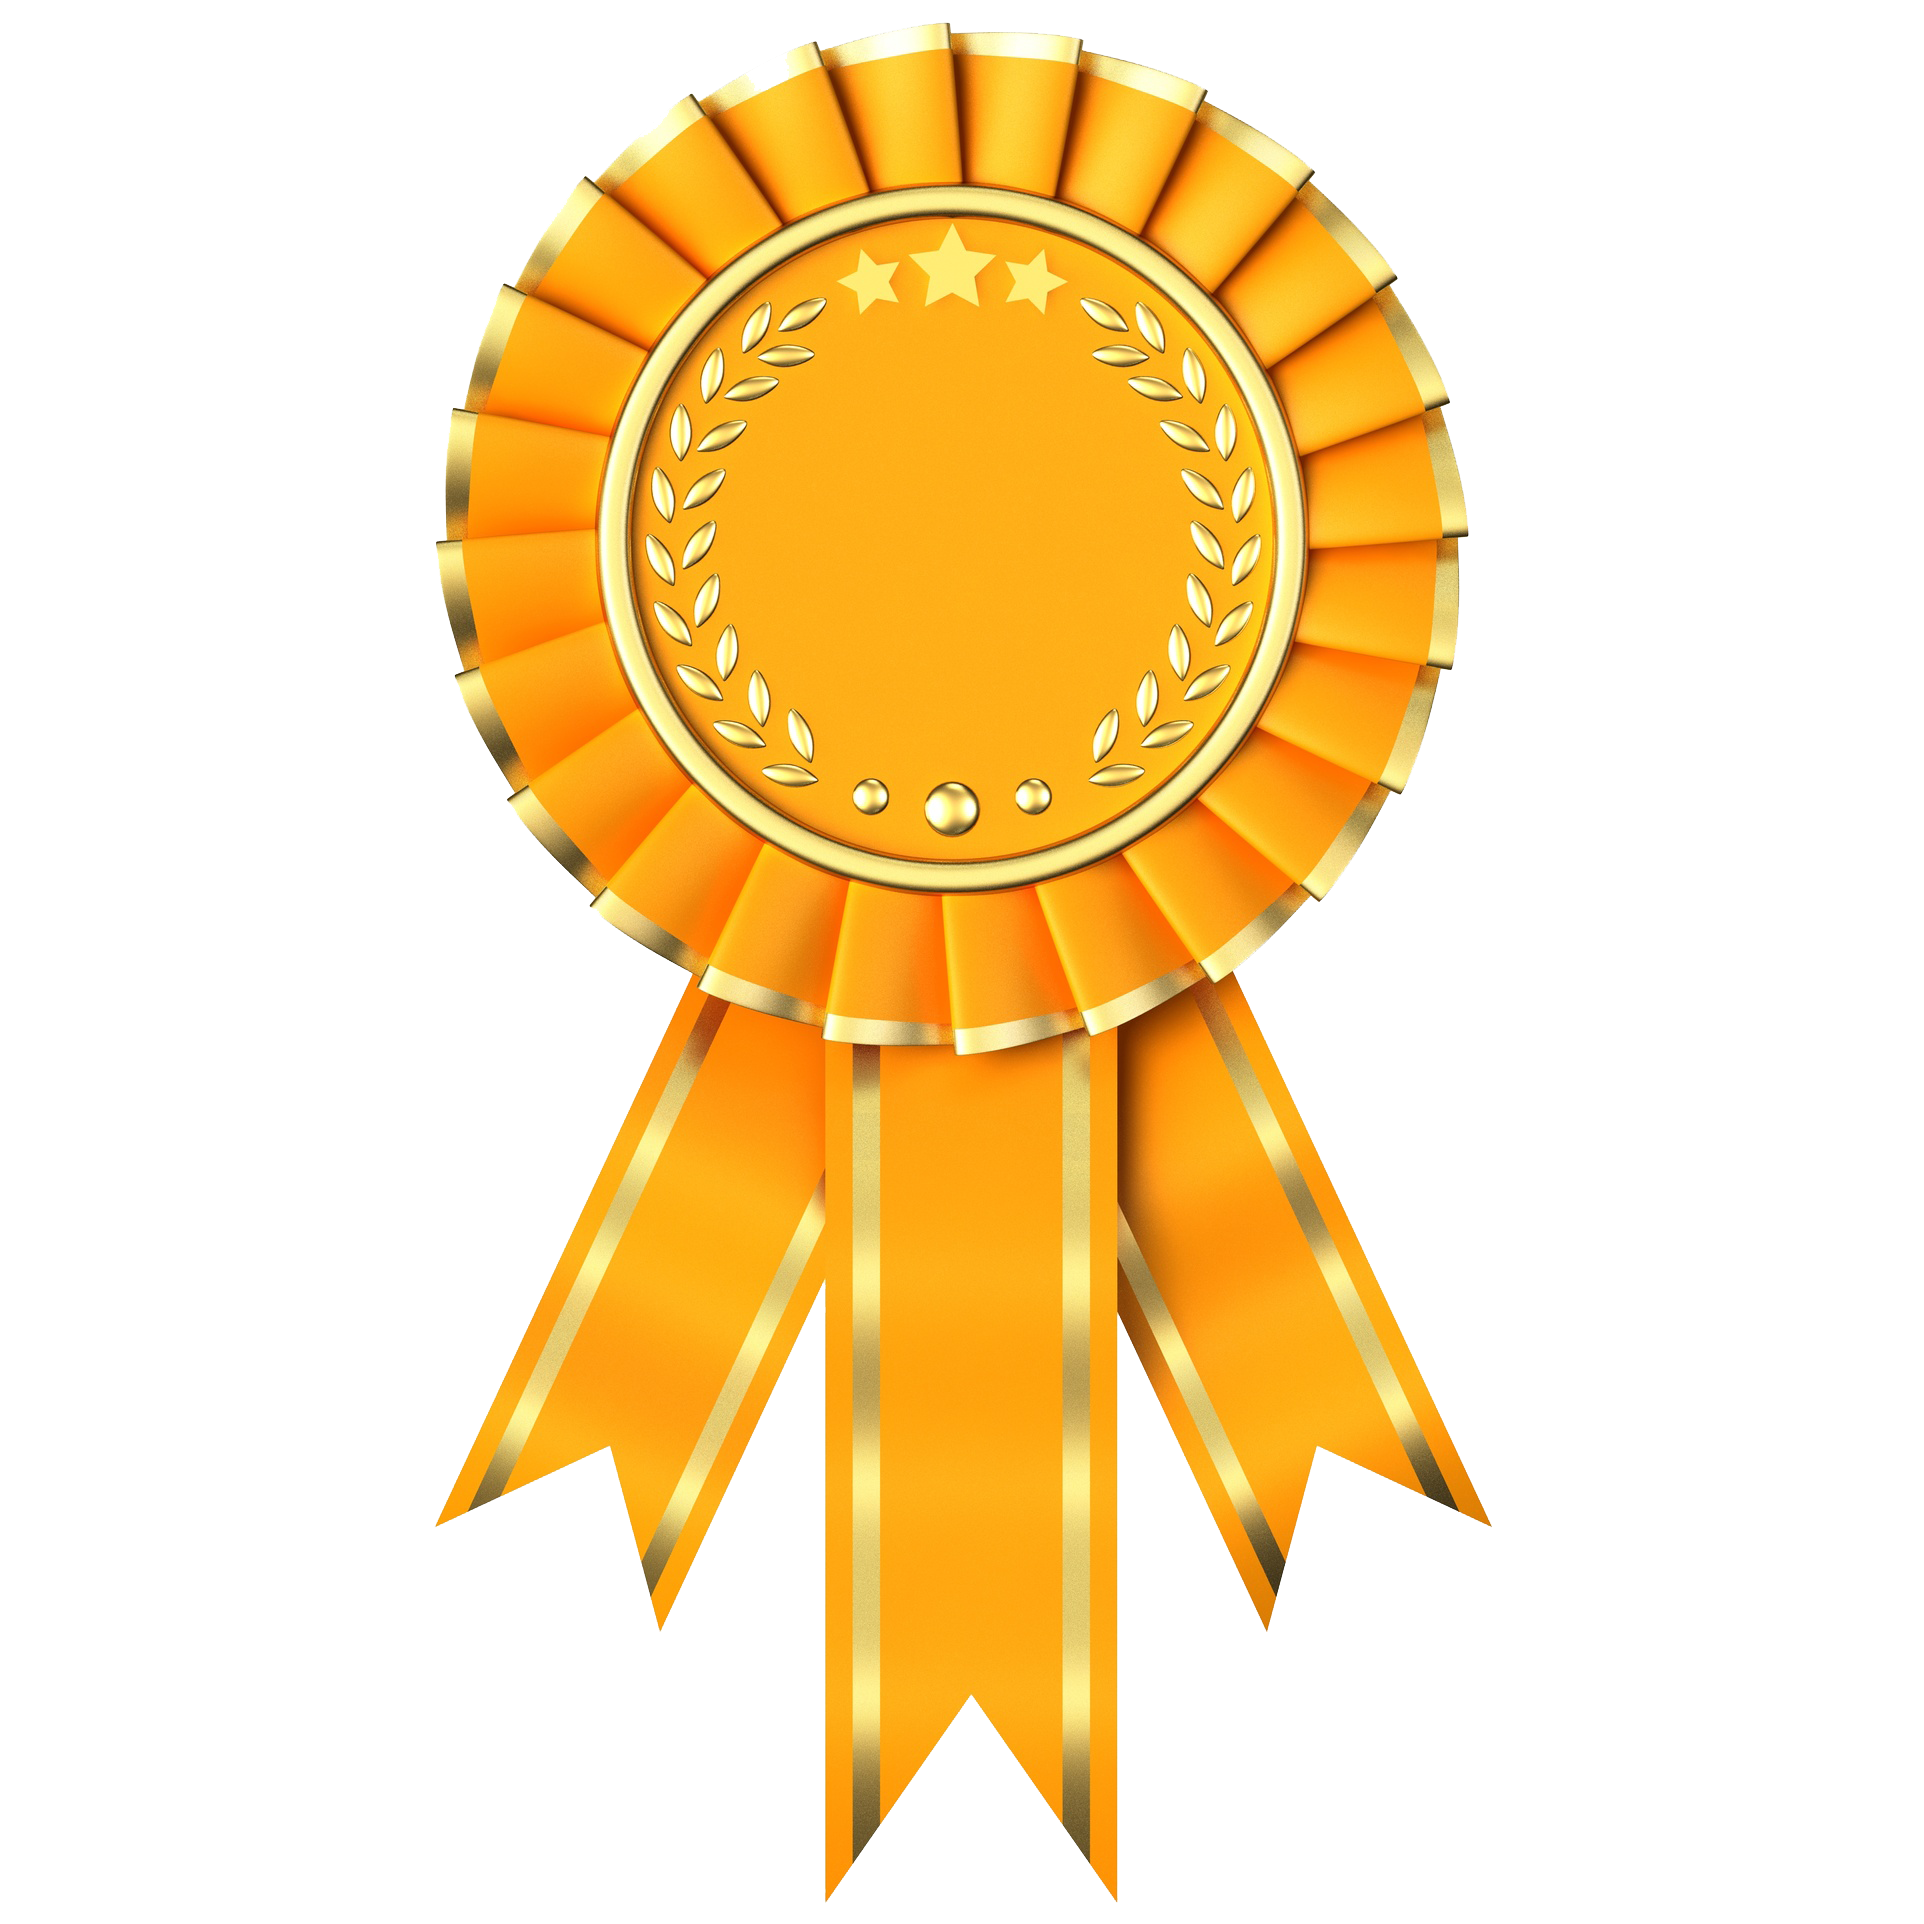 prize clipart school recognition day